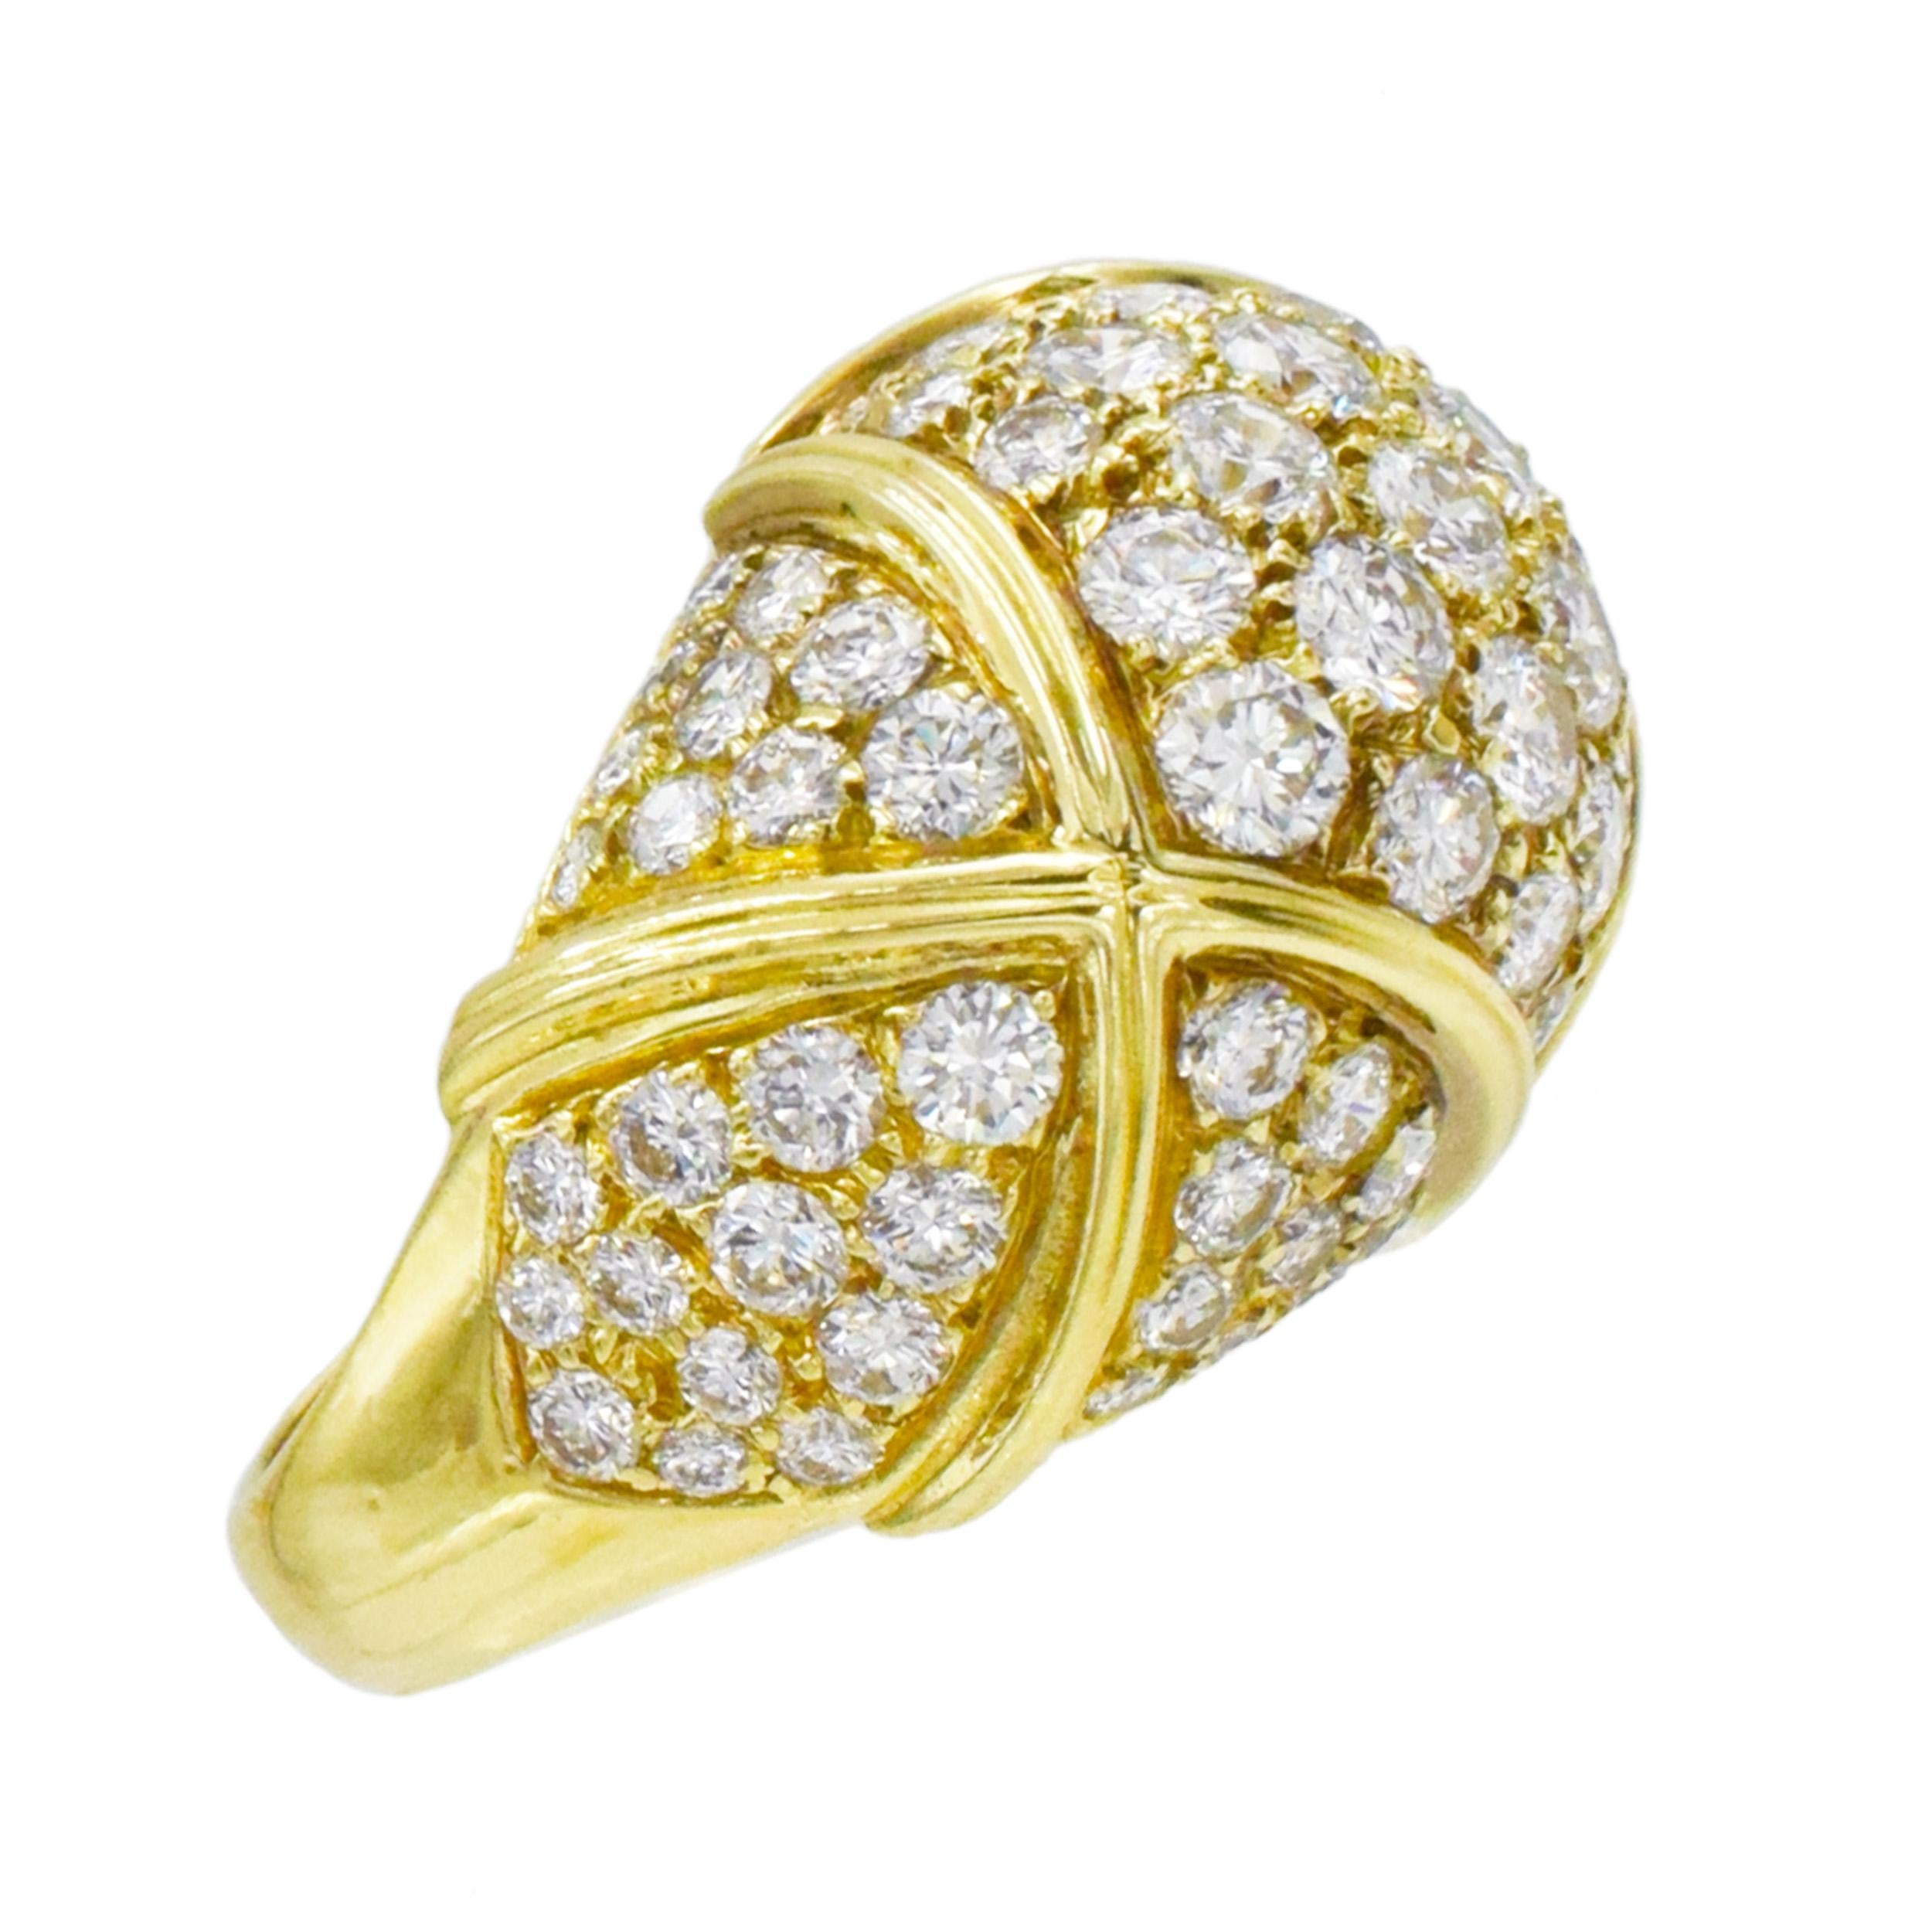 Van Cleef & Arpels Gold and Diamond Dome Ring in 18k yellow gold. 
This ring has 91 round brilliant cut diamonds with total weight of approximately 4.35ct, Color: F/G, Clartity: VS. Crafted in 18k yellow gold. Accented with yellow gold 